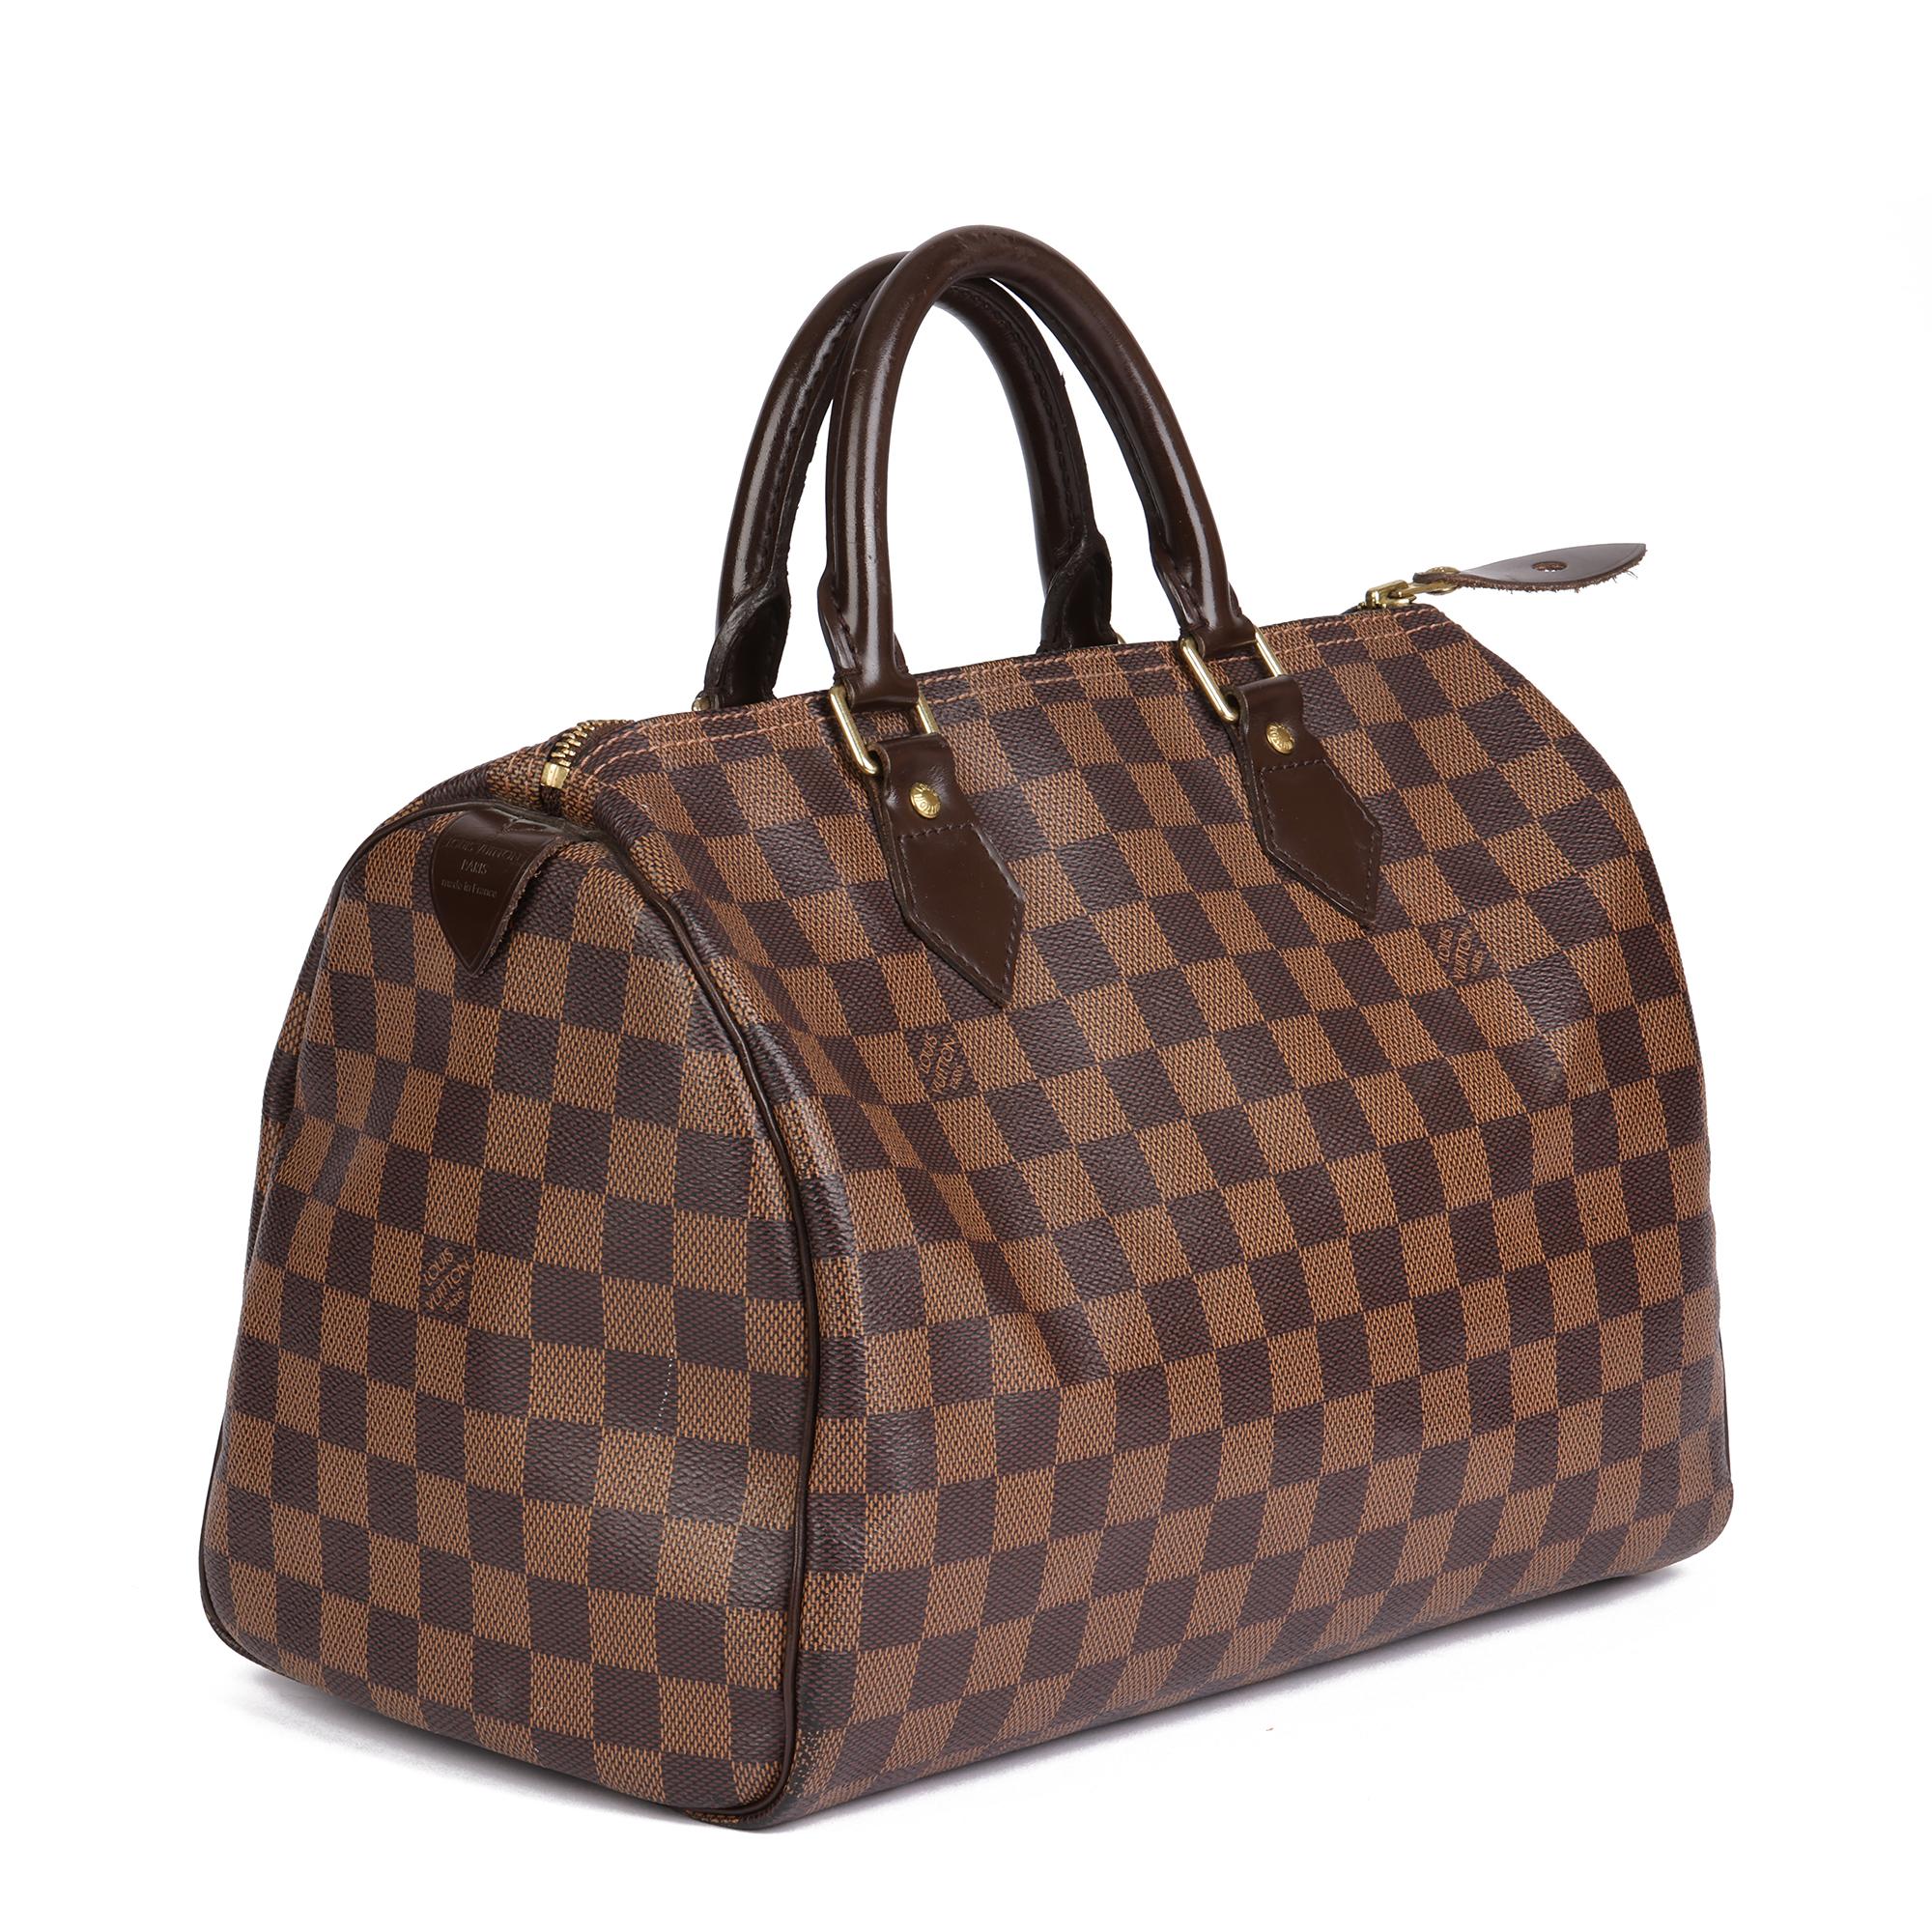 LOUIS VUITTON
Brown Damier Coated Canvas & Brown Calfskin Leather Speedy 30

Serial Number: DU1099
Age (Circa): 2009
Accompanied By: Louis Vuitton Dust Bag
Authenticity Details: Date Stamp (Made in France)
Gender: Ladies
Type: Tote

Colour: